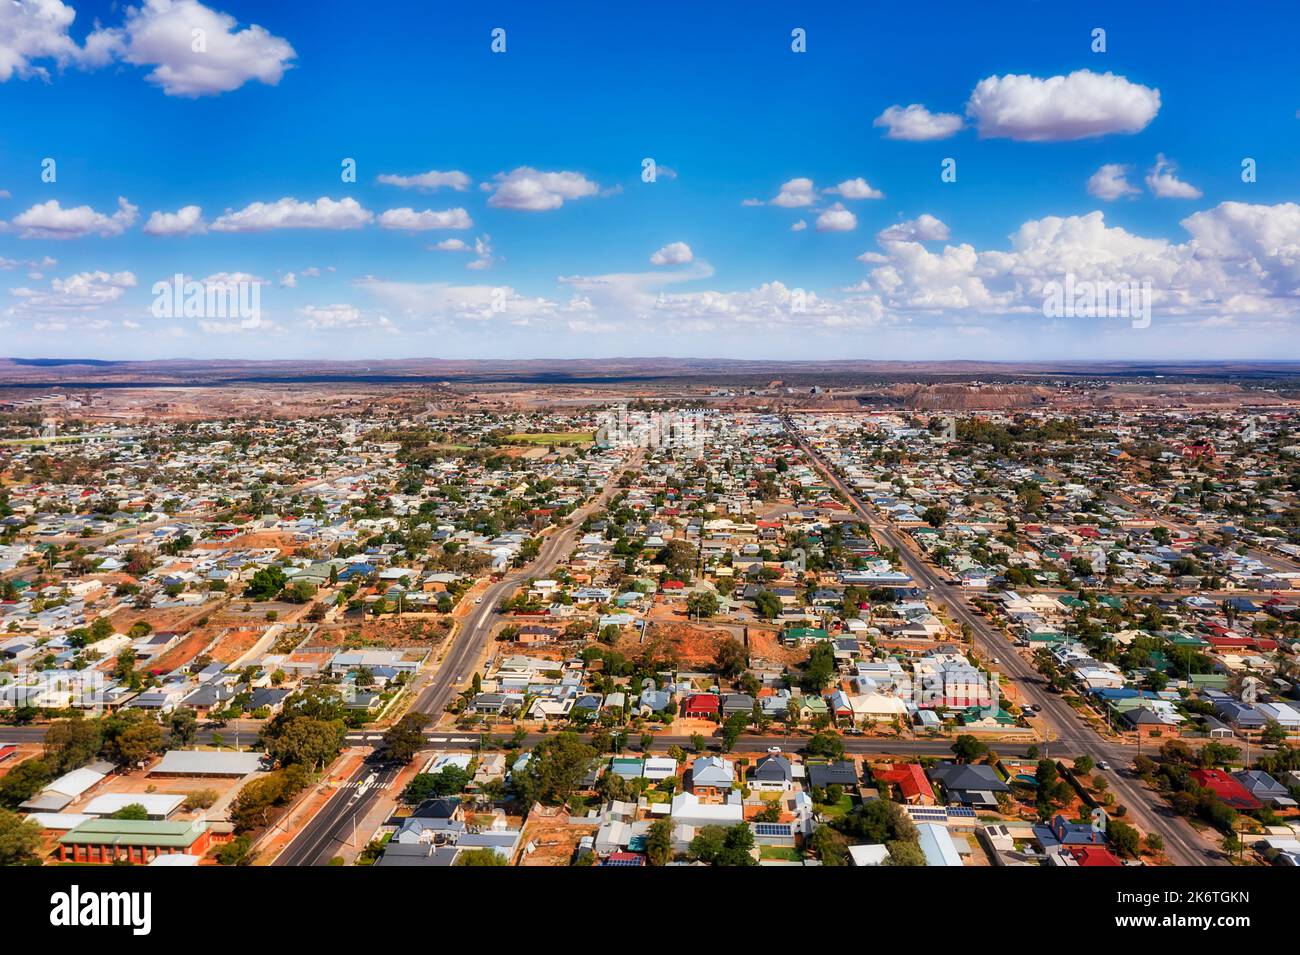 Suburbs of residential streets and houses of Broken hill city in Australian outback - aerial townscape. Stock Photo